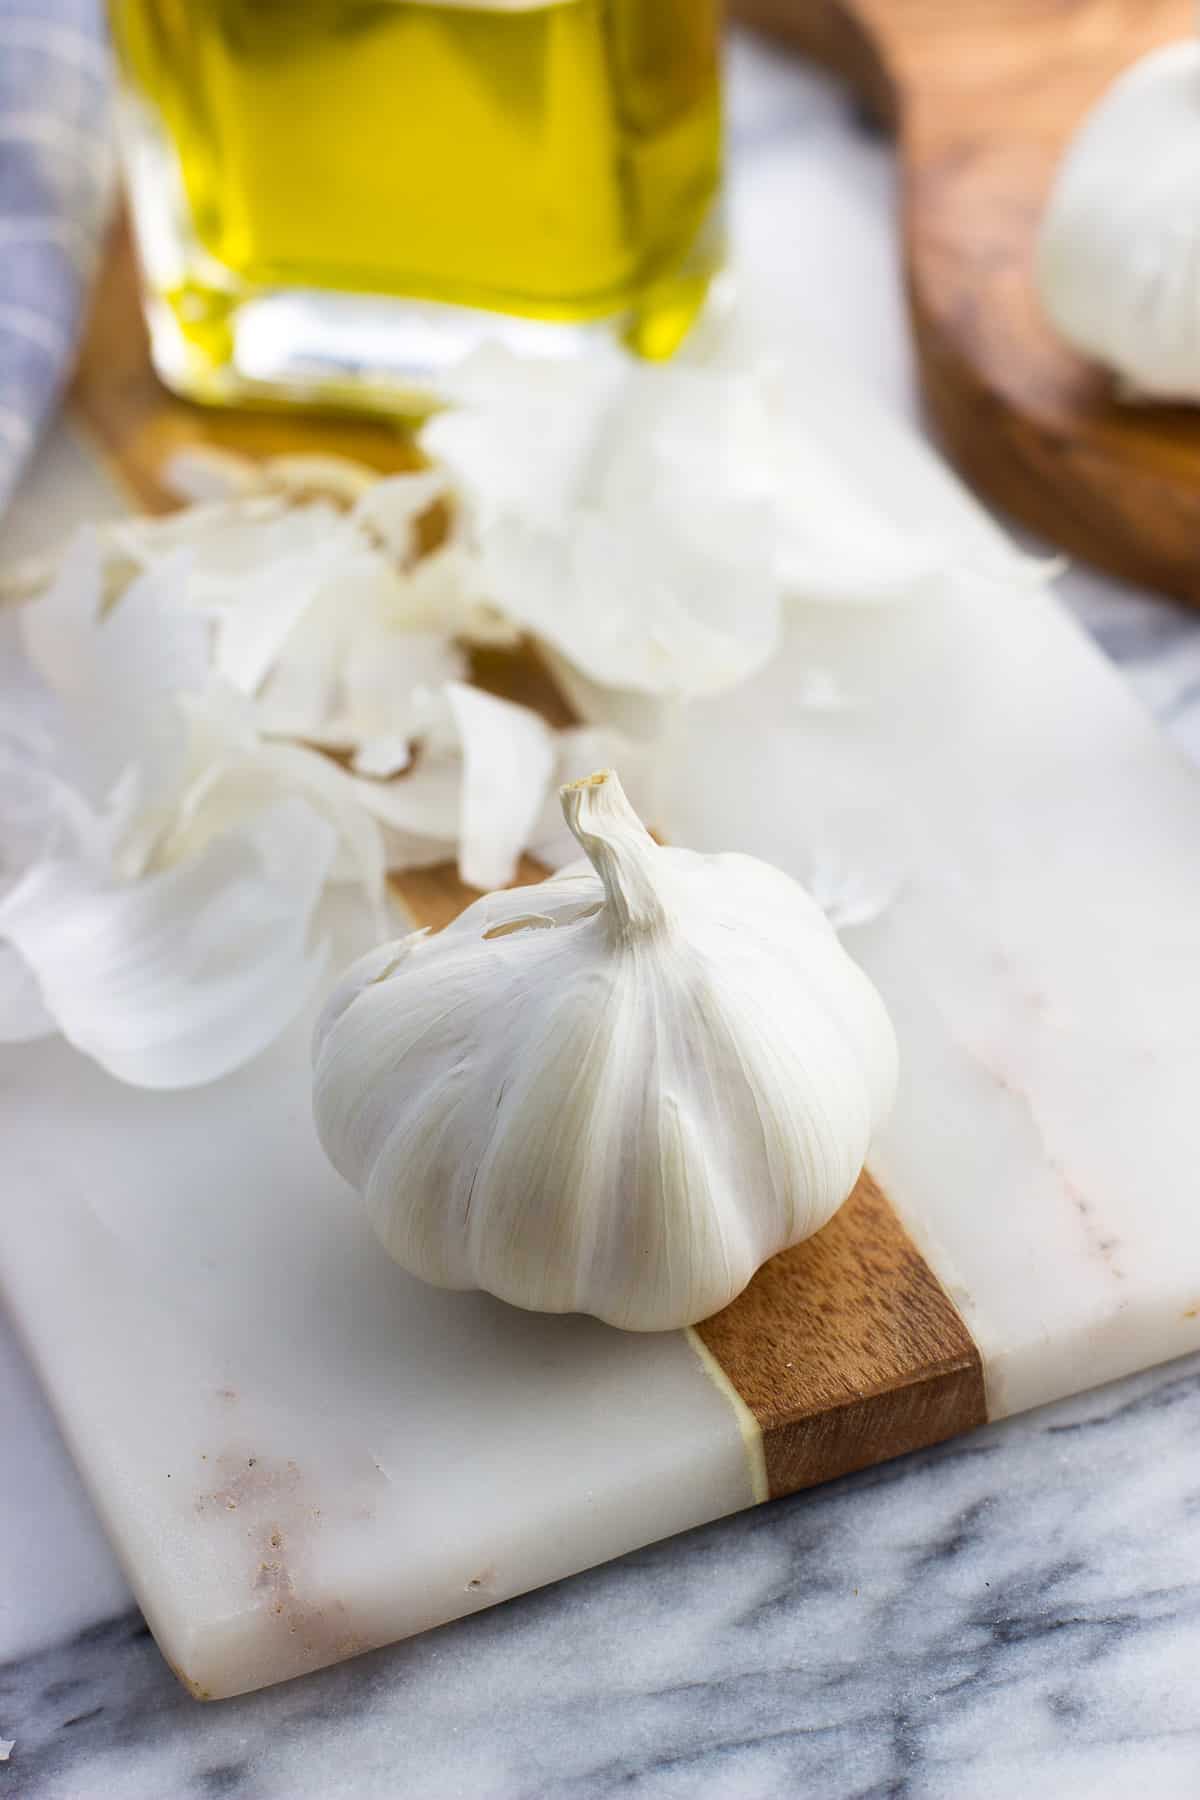 A garlic head peeled down to the innermost layer of skin.